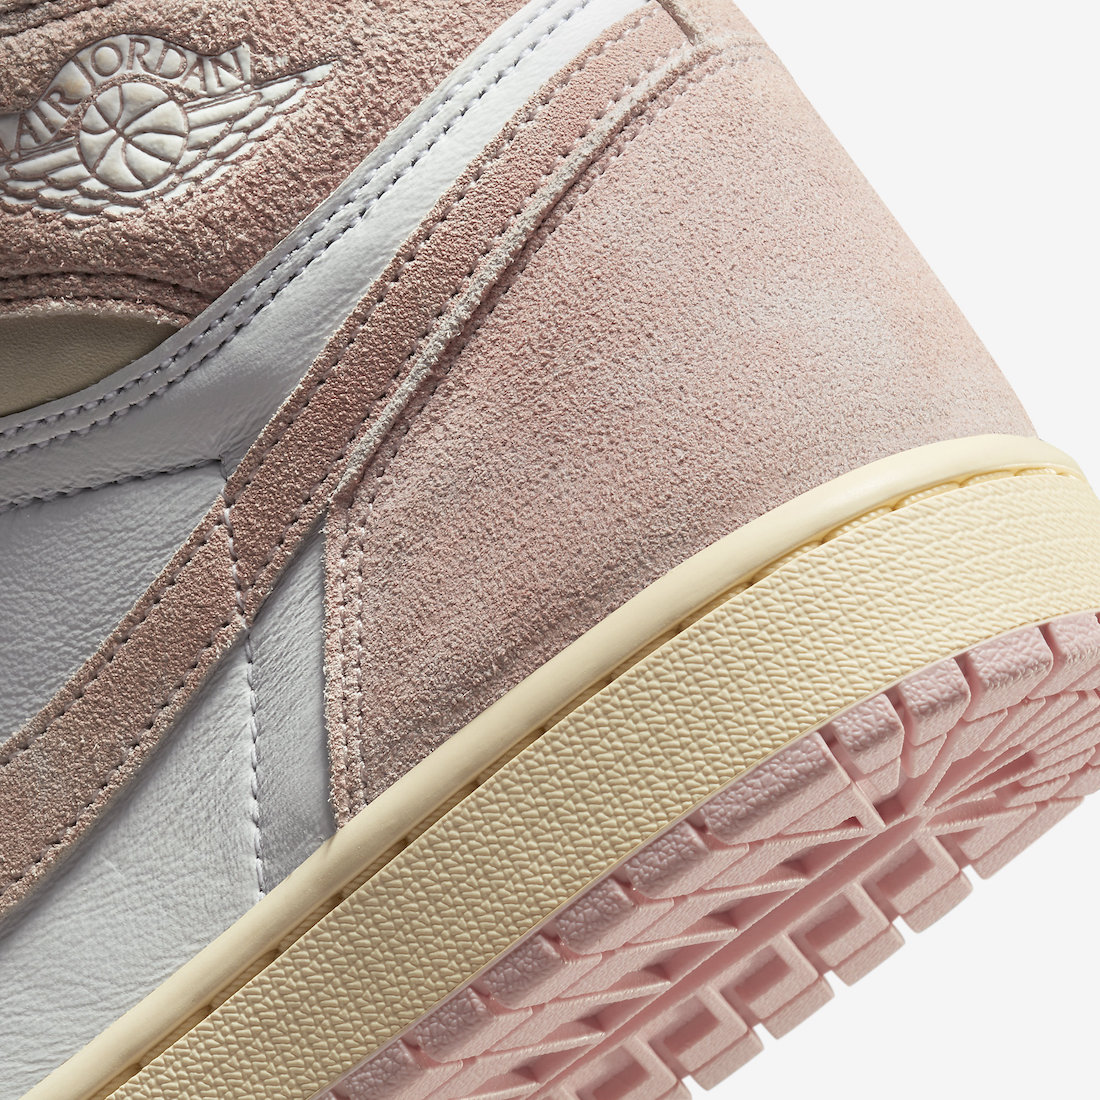 Air Jordan 1 Washed Pink FD2596-600 Release Date Price